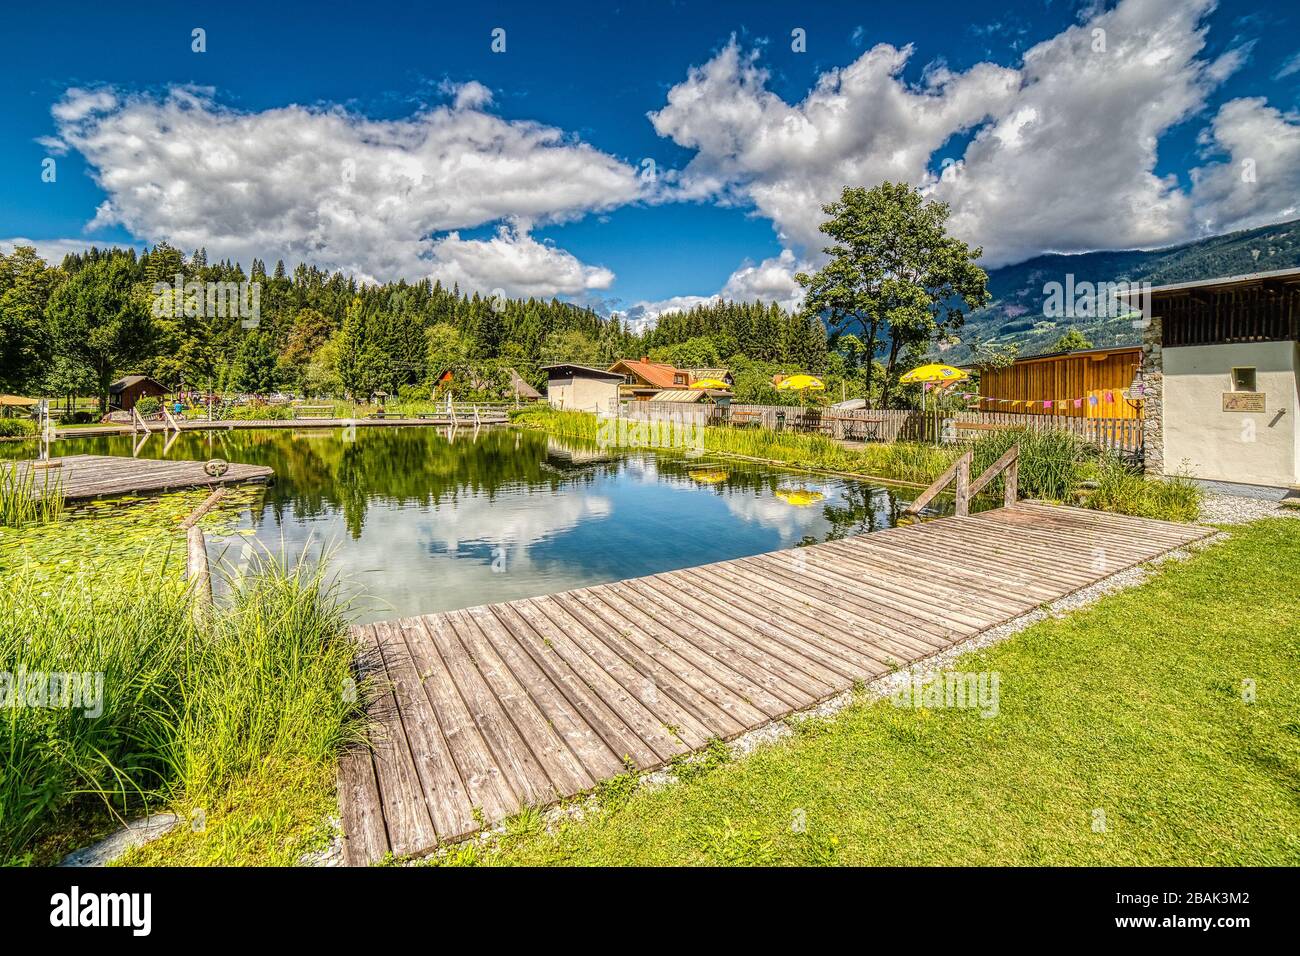 Koetschach-Mauthen (HE), AUSTRIA - AUGUST 14, 2019: the waters of the natural swimming pool are reflecting the clouds that are covering the sky Stock Photo